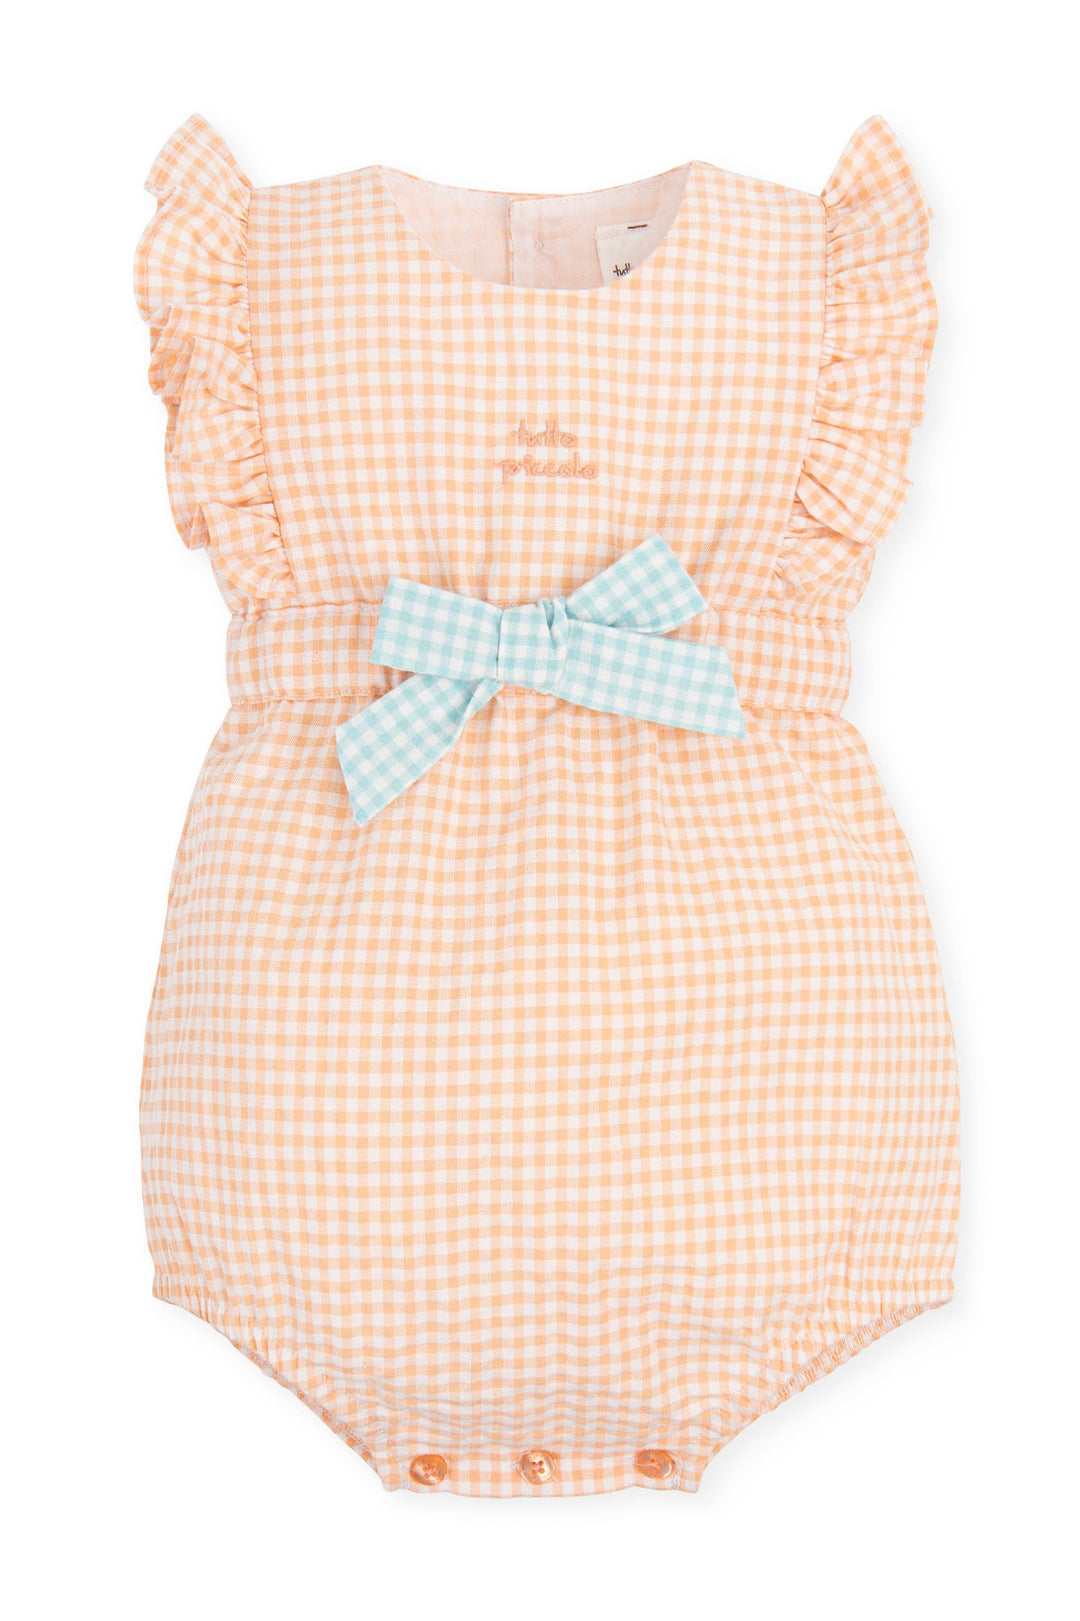 Tutto Piccolo "Elsie" Peach Gingham Romper | iphoneandroidapplications